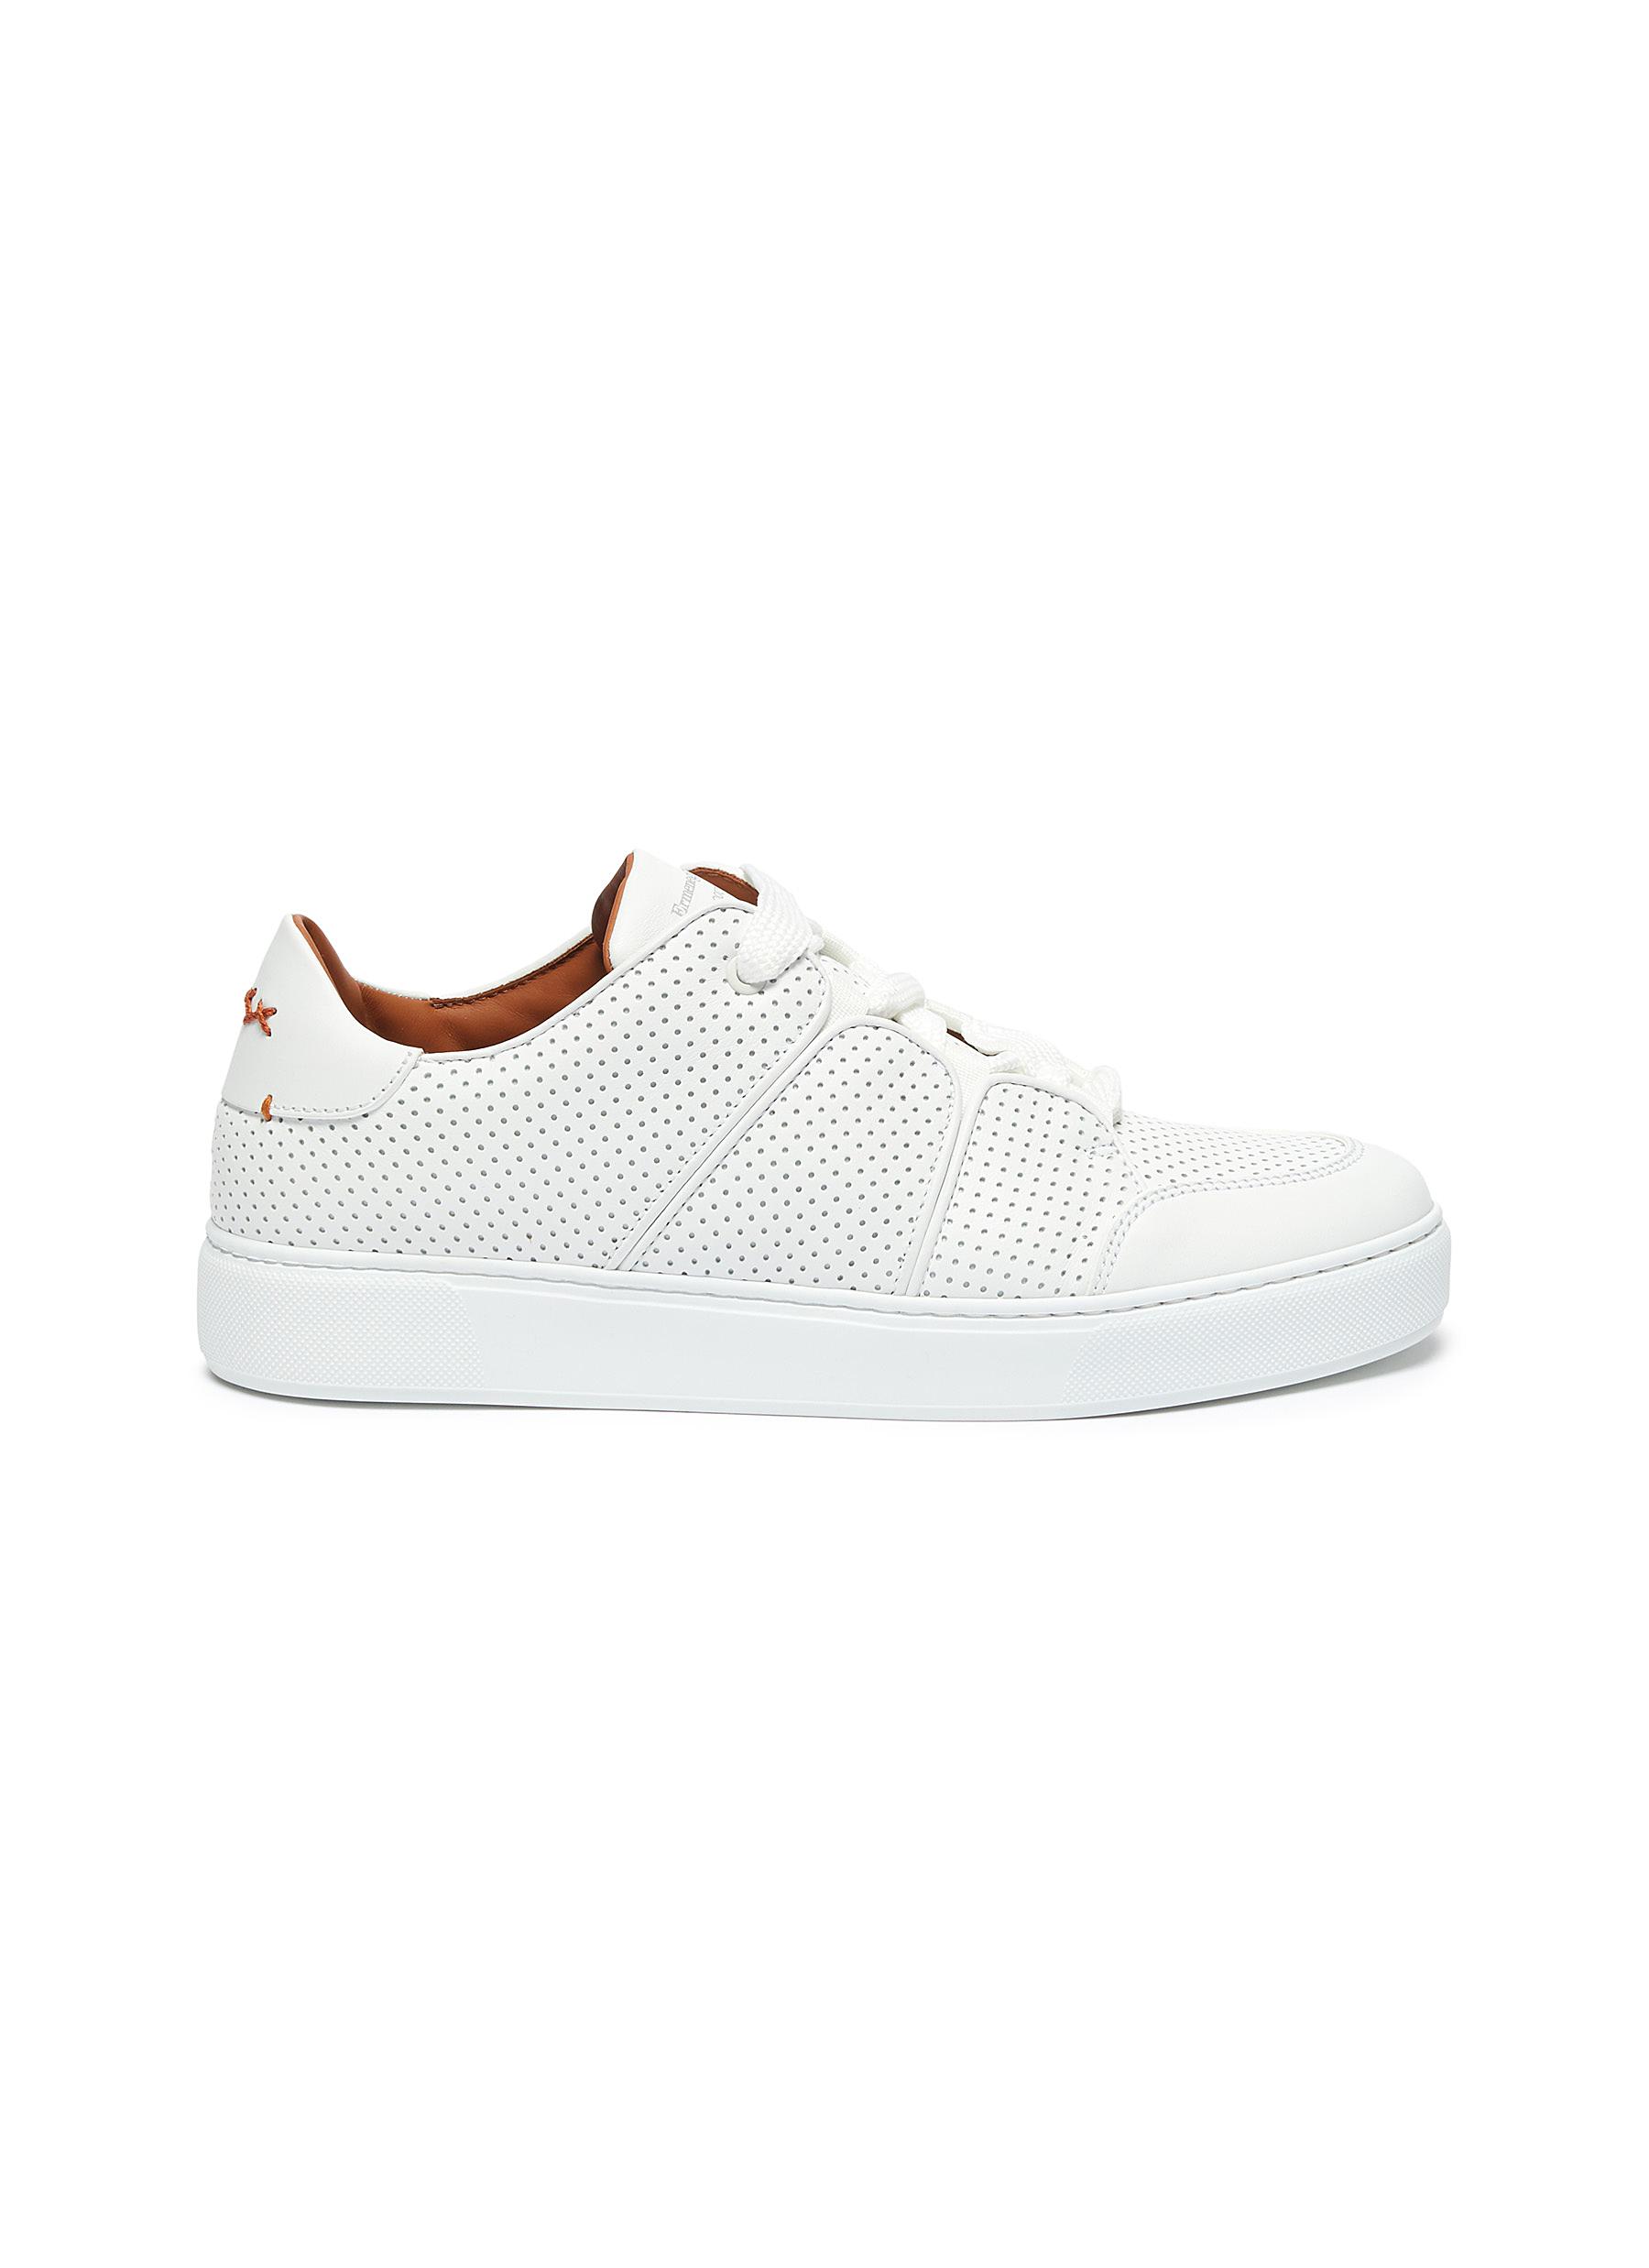 'Tiziano' Perforated Panel Low-top Leather Sneakers